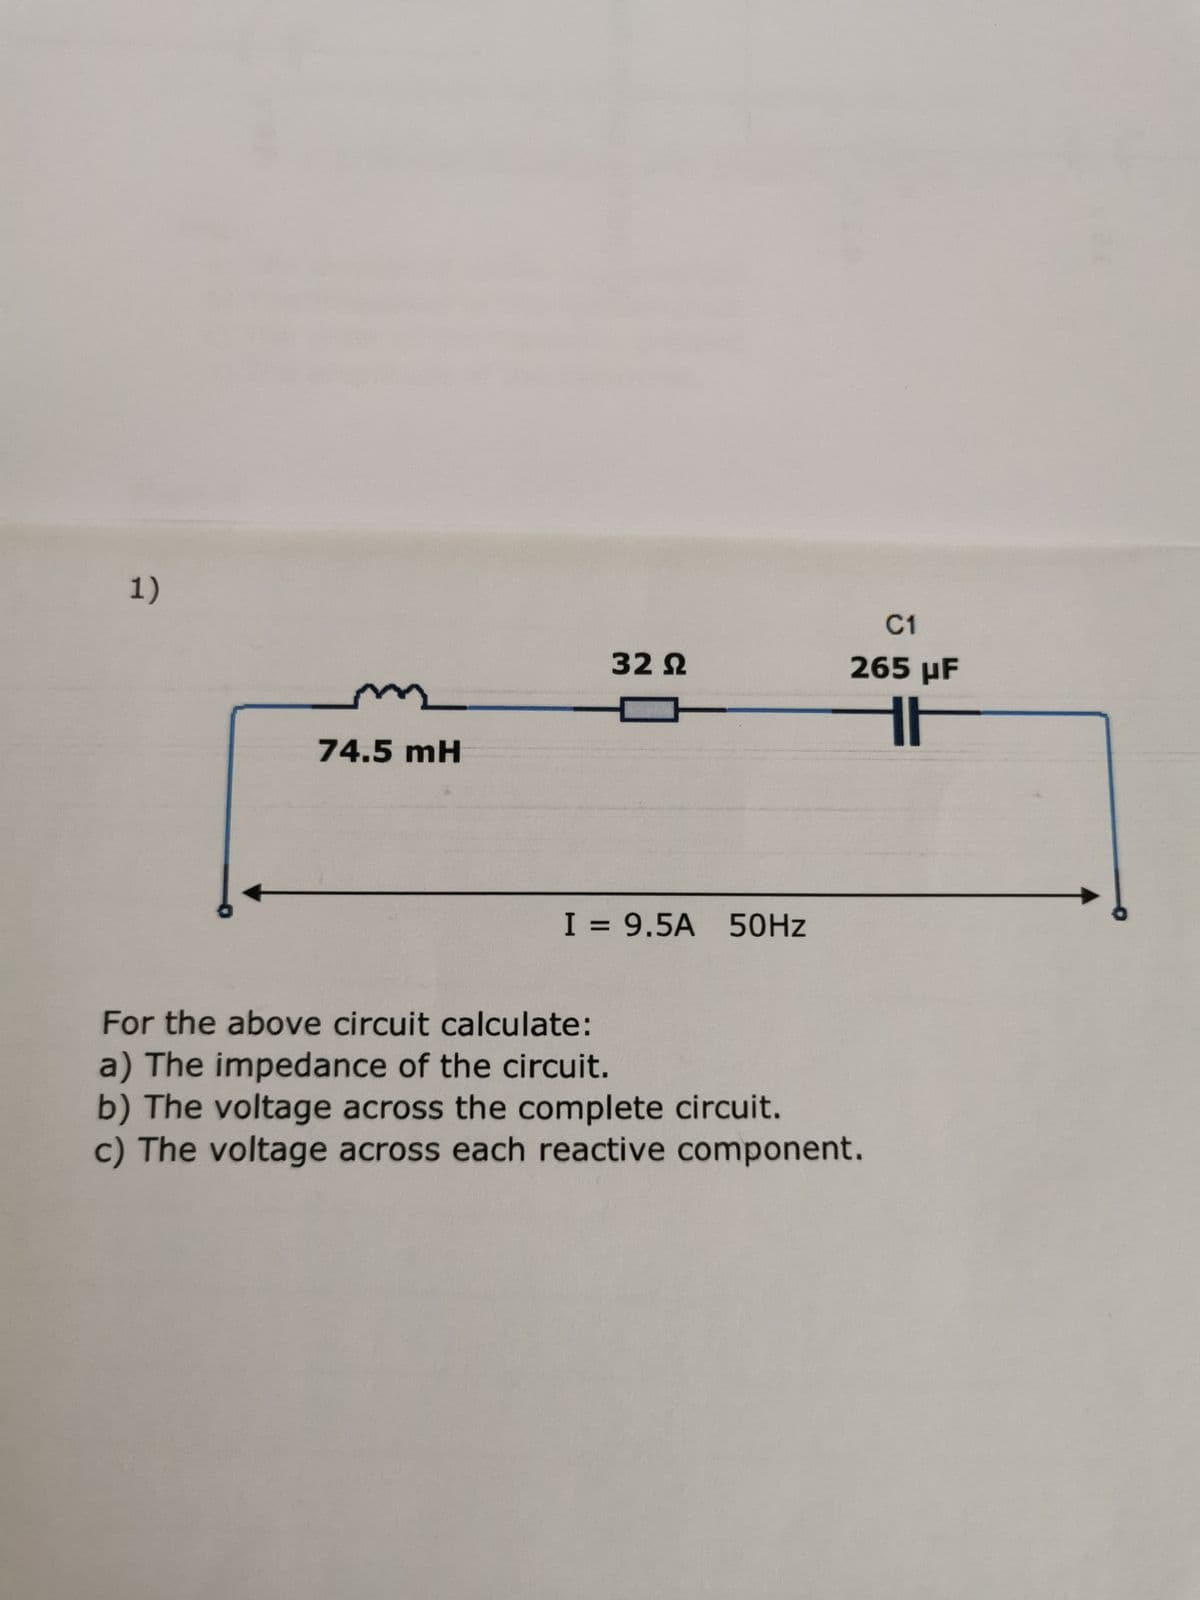 1)
74.5 mH
32 Ω
I = 9.5A 50Hz
C1
265 µF
16
For the above circuit calculate:
a) The impedance of the circuit.
b) The voltage across the complete circuit.
c) The voltage across each reactive component.